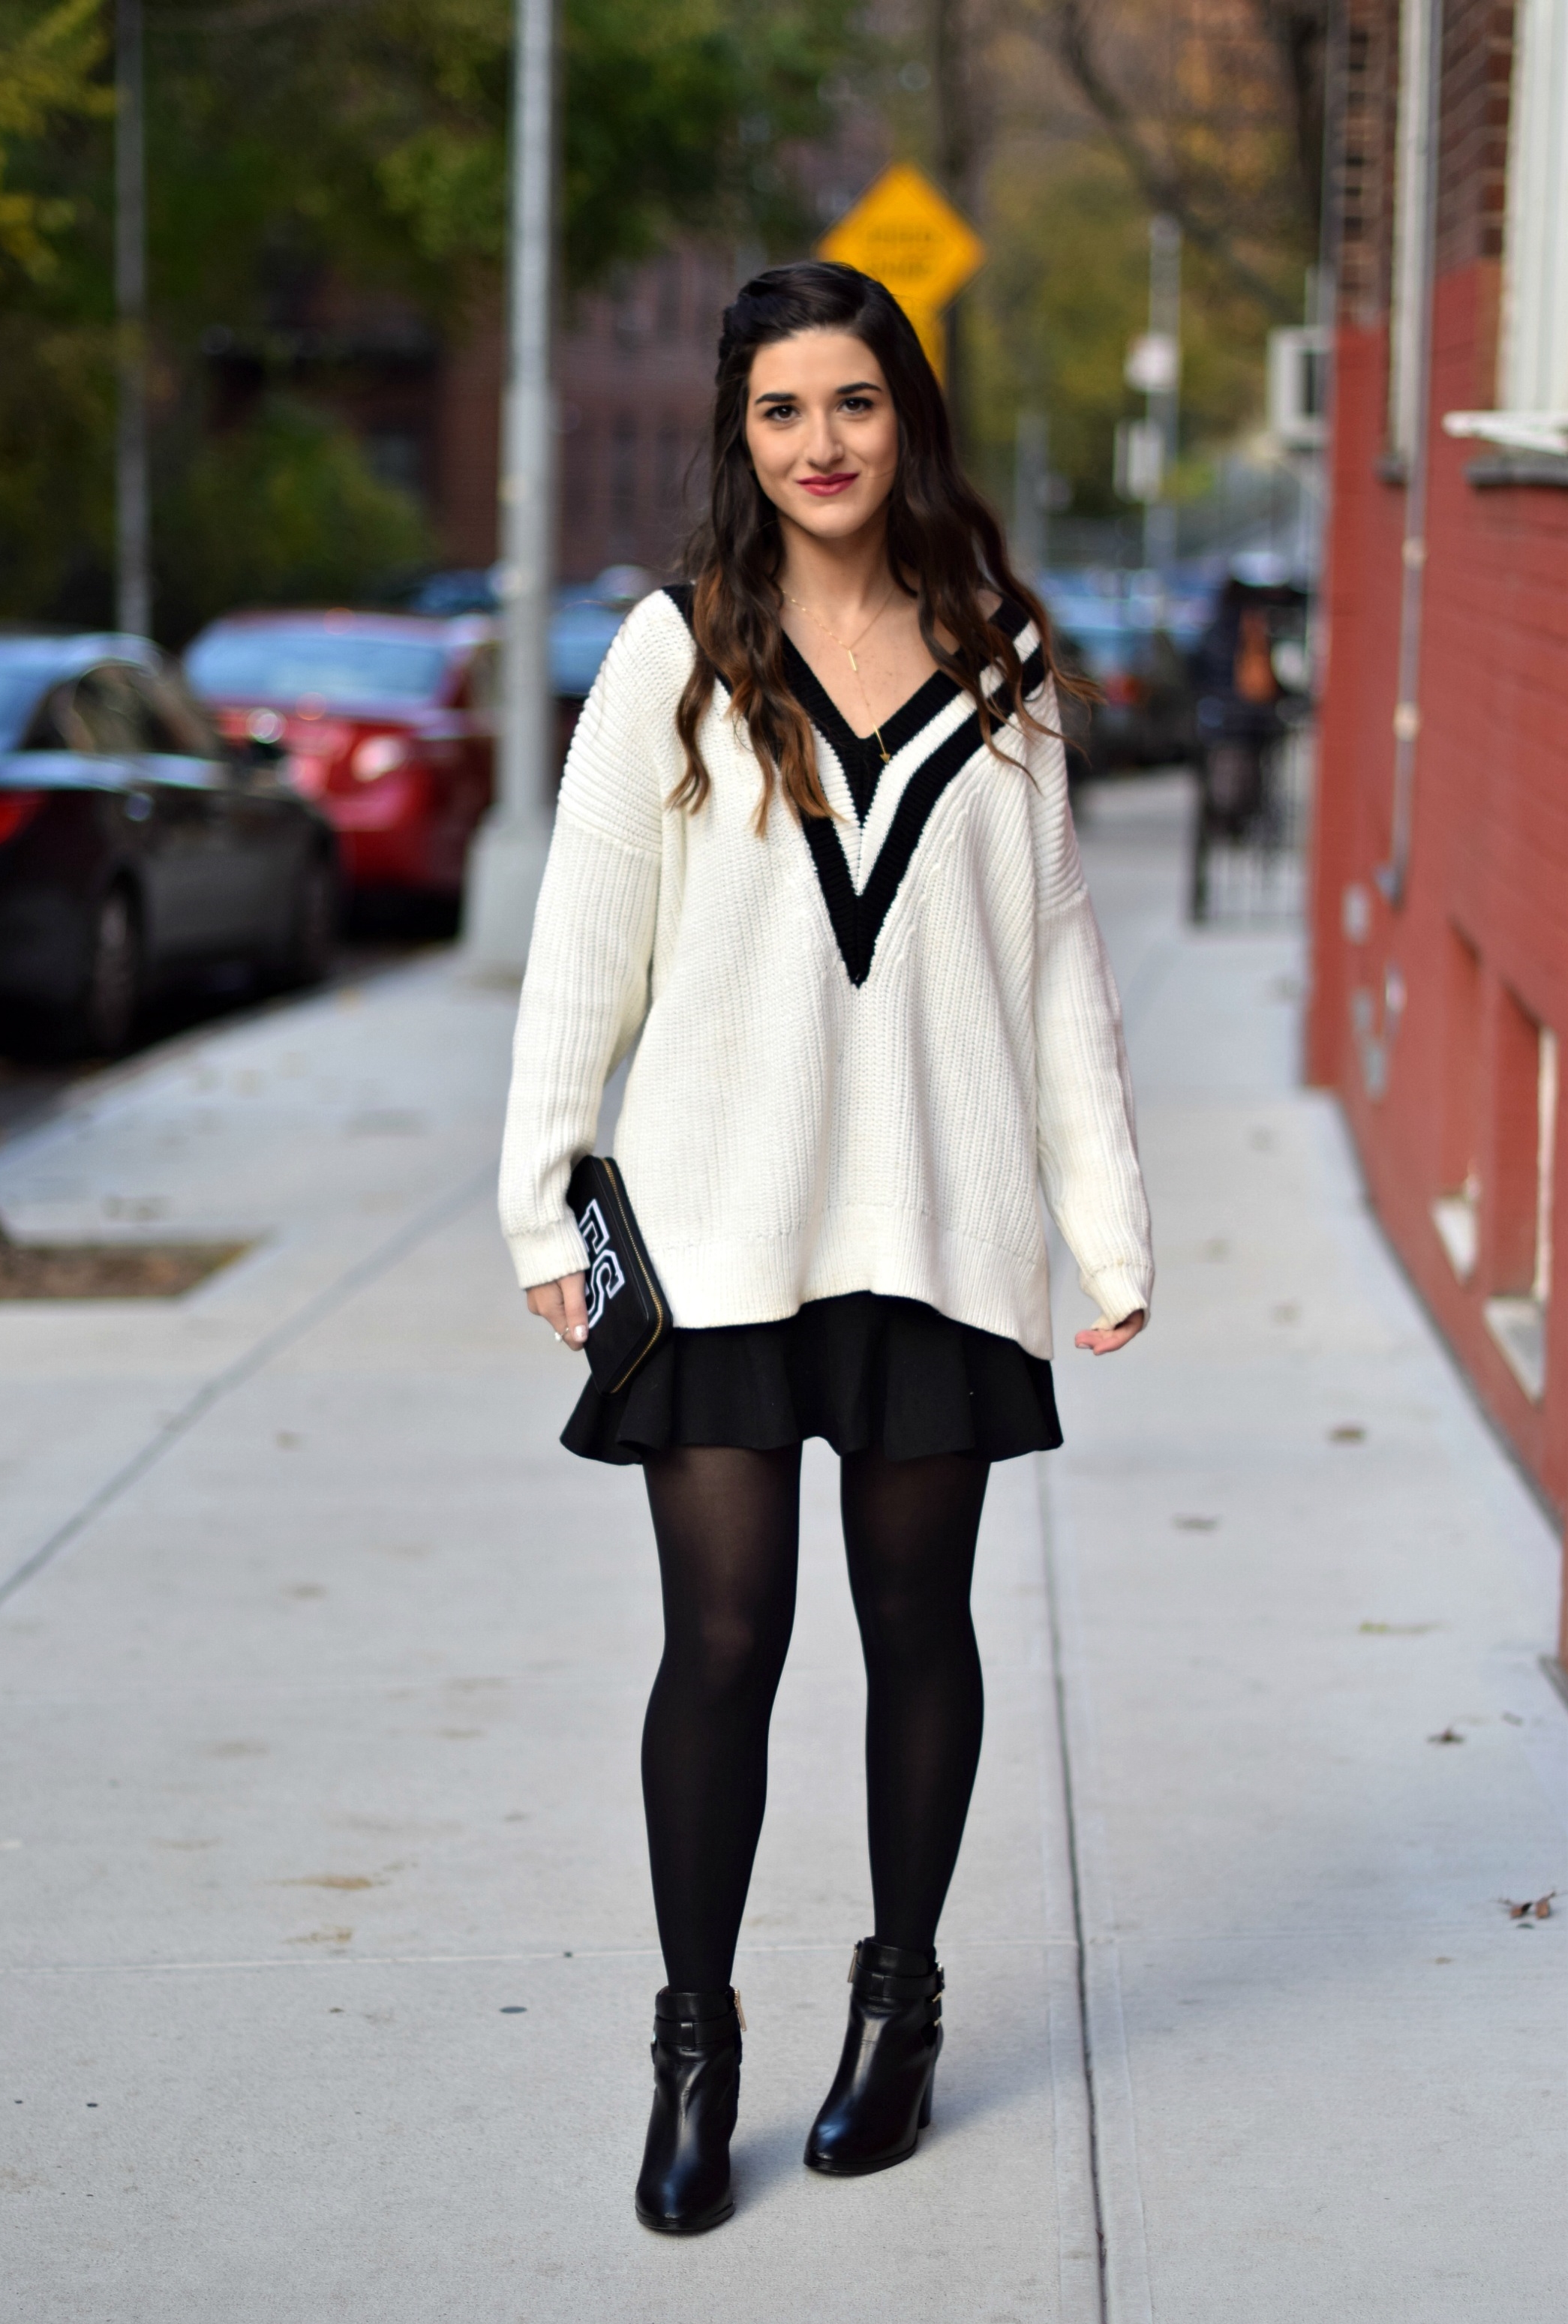 Chunky Varsity Knit Fur Stole Louboutins & Love Fashion Blog Esther Santer NYC Street Style Blogger Sweater Girl Women Photoshoot Model Shoes Black Booties Louise et Cie Nordstrom Hair Swag H&M Mini Skirt Outfit OOTD Neutral Tights Winter Wear Shop.jpg